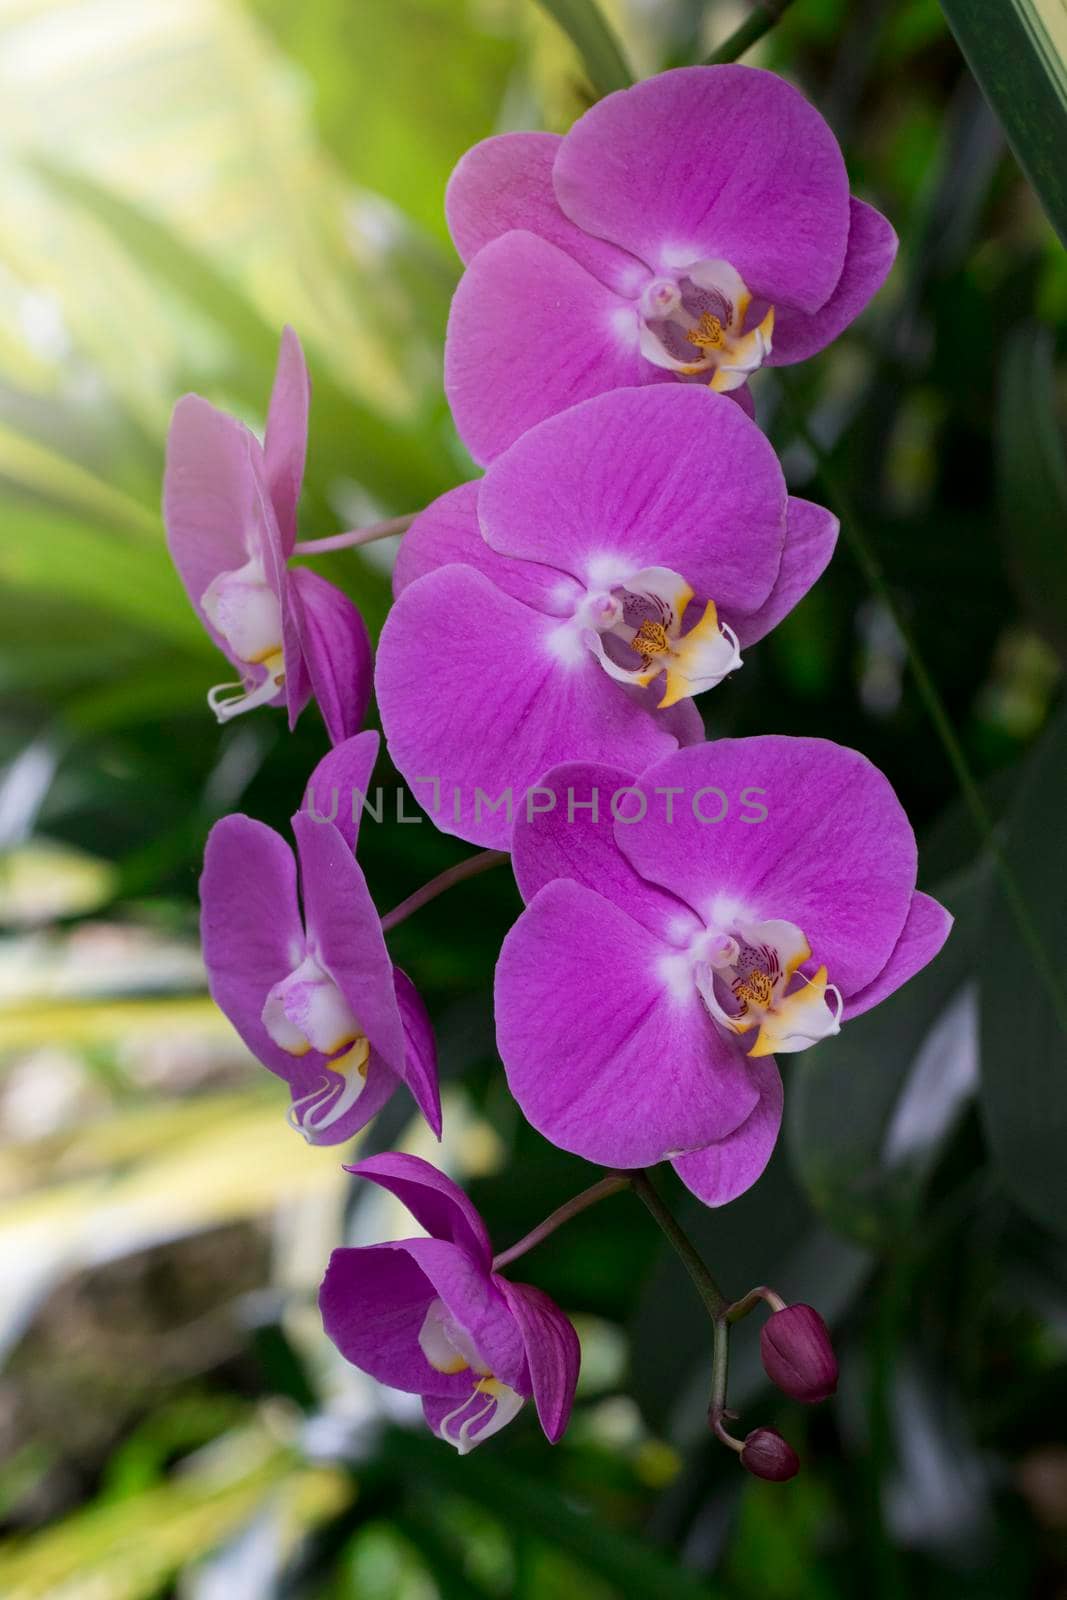 Image of beautiful purple orchid flowers in the garden.